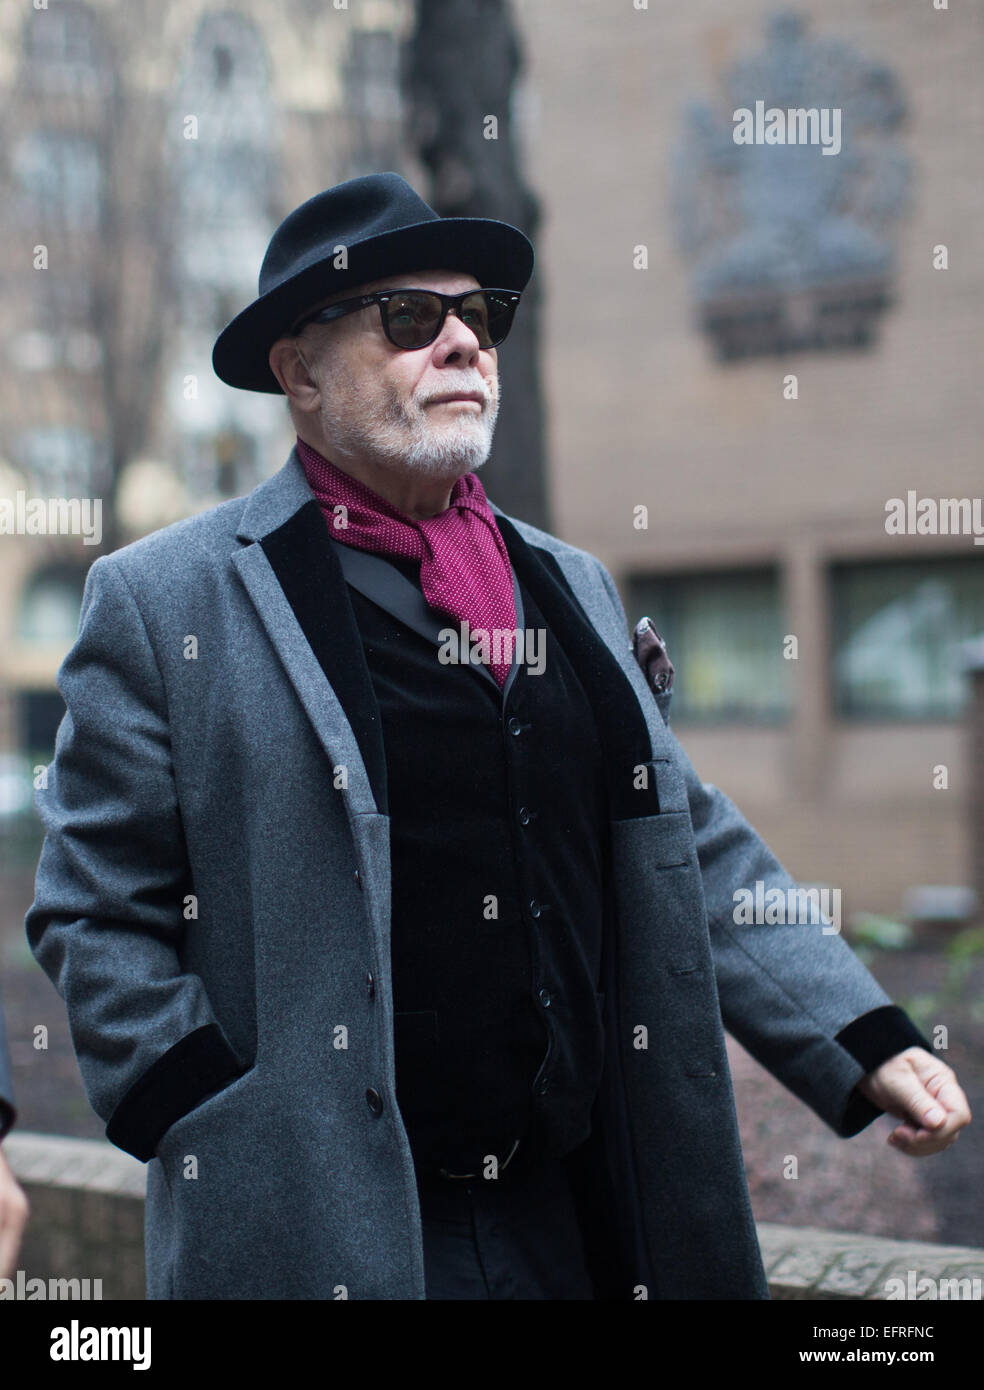 Wednesday, February 4, 2015  British former pop star Gary Glitter, whose real name is Paul Gadd, arrives at Southwark Crown Court in central London. Stock Photo